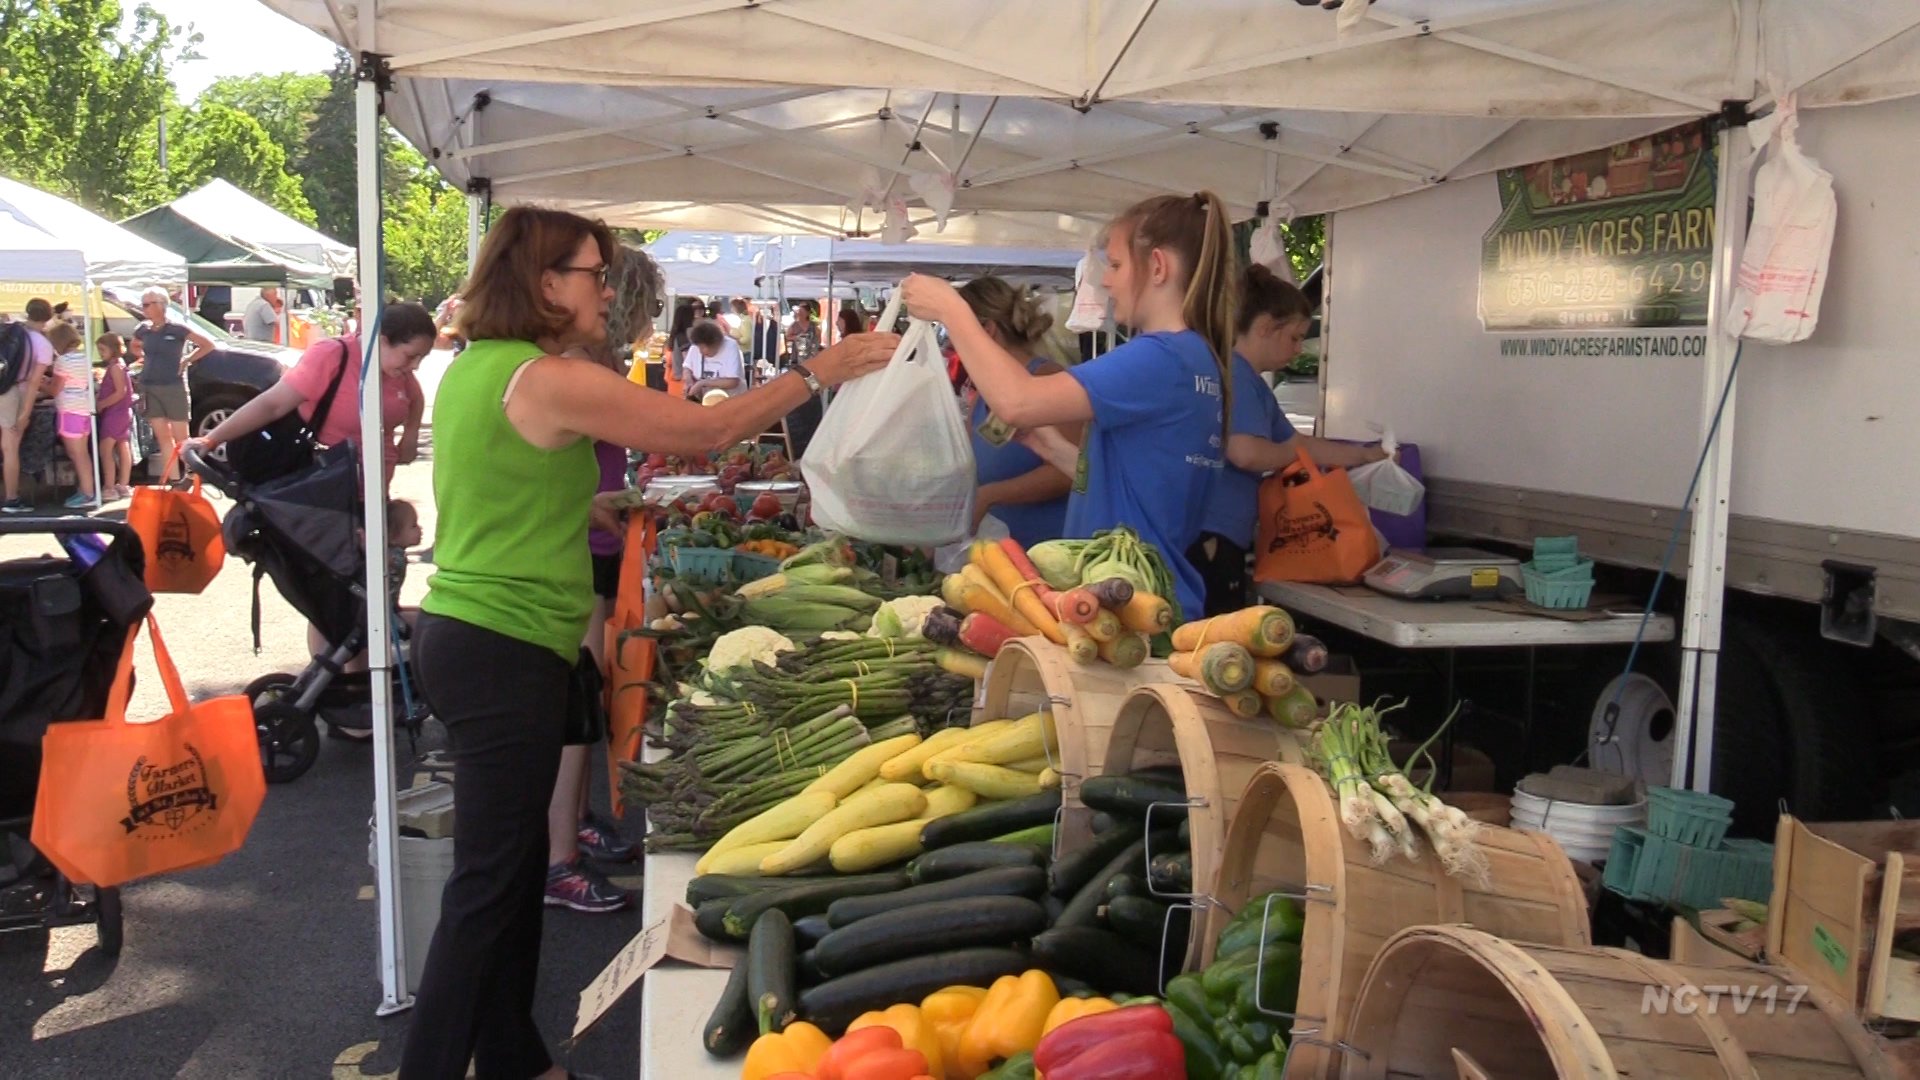 The Farmers Markets of Naperville NCTV17